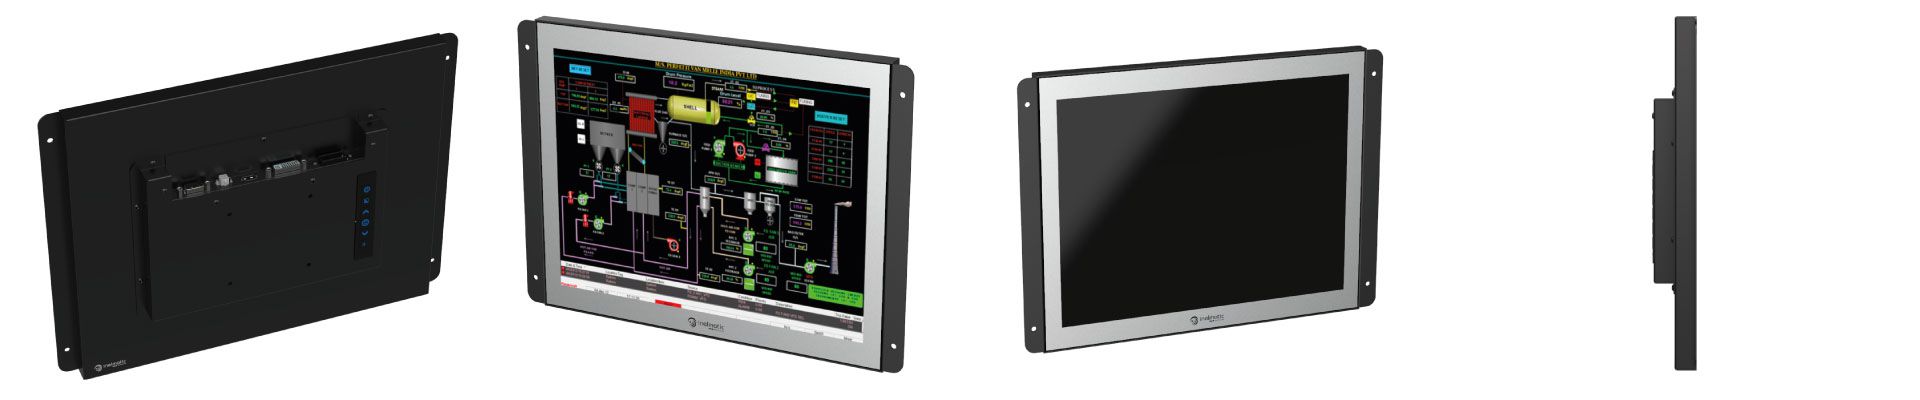 19 inches rugged display - Inelmatic